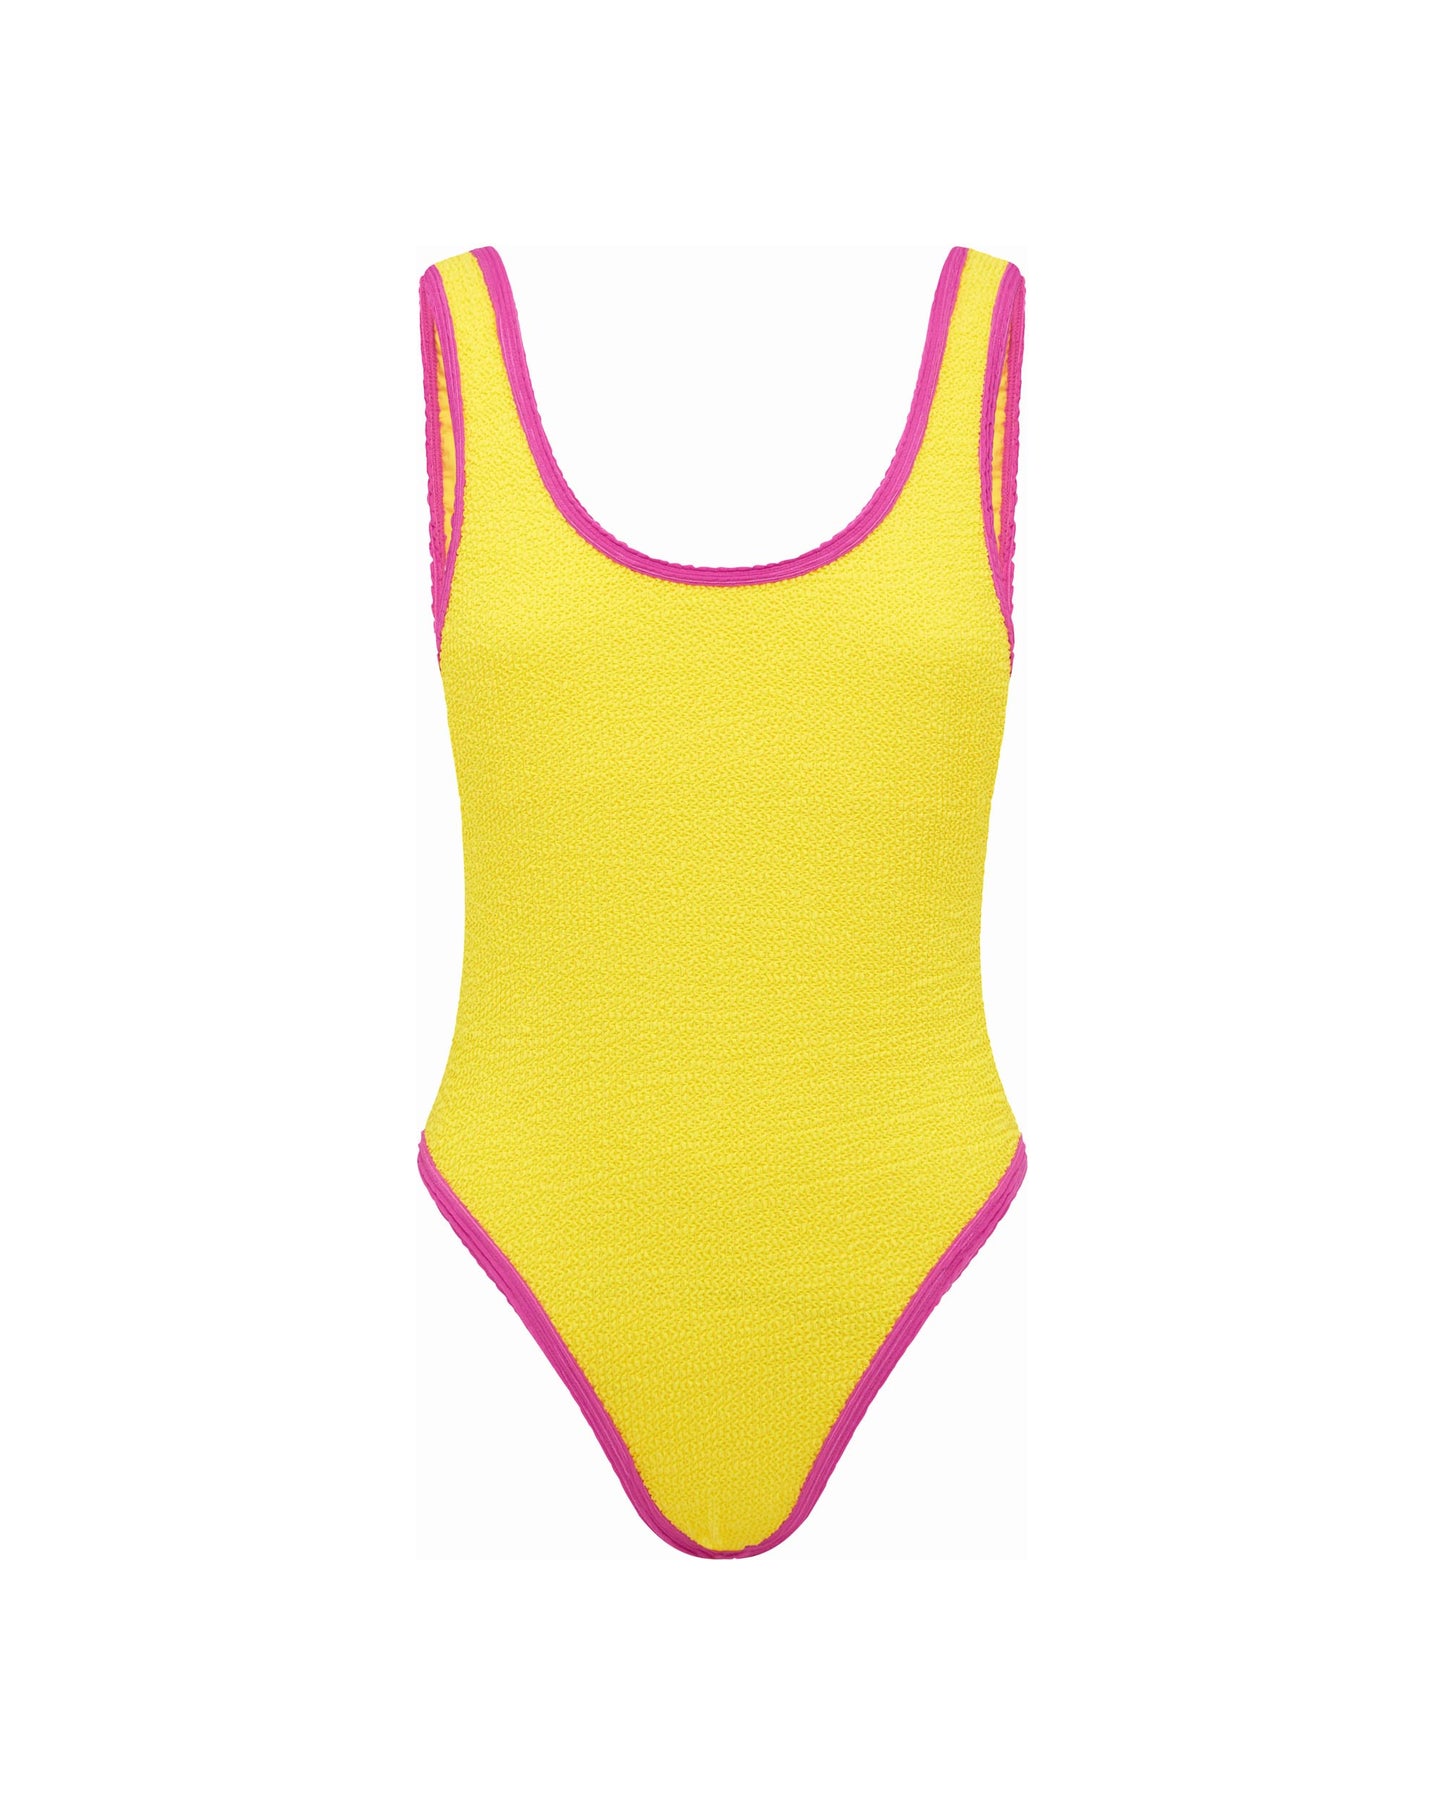 It's Now Cool Swimwear - The Showtime Duo One Piece - Hibiscus